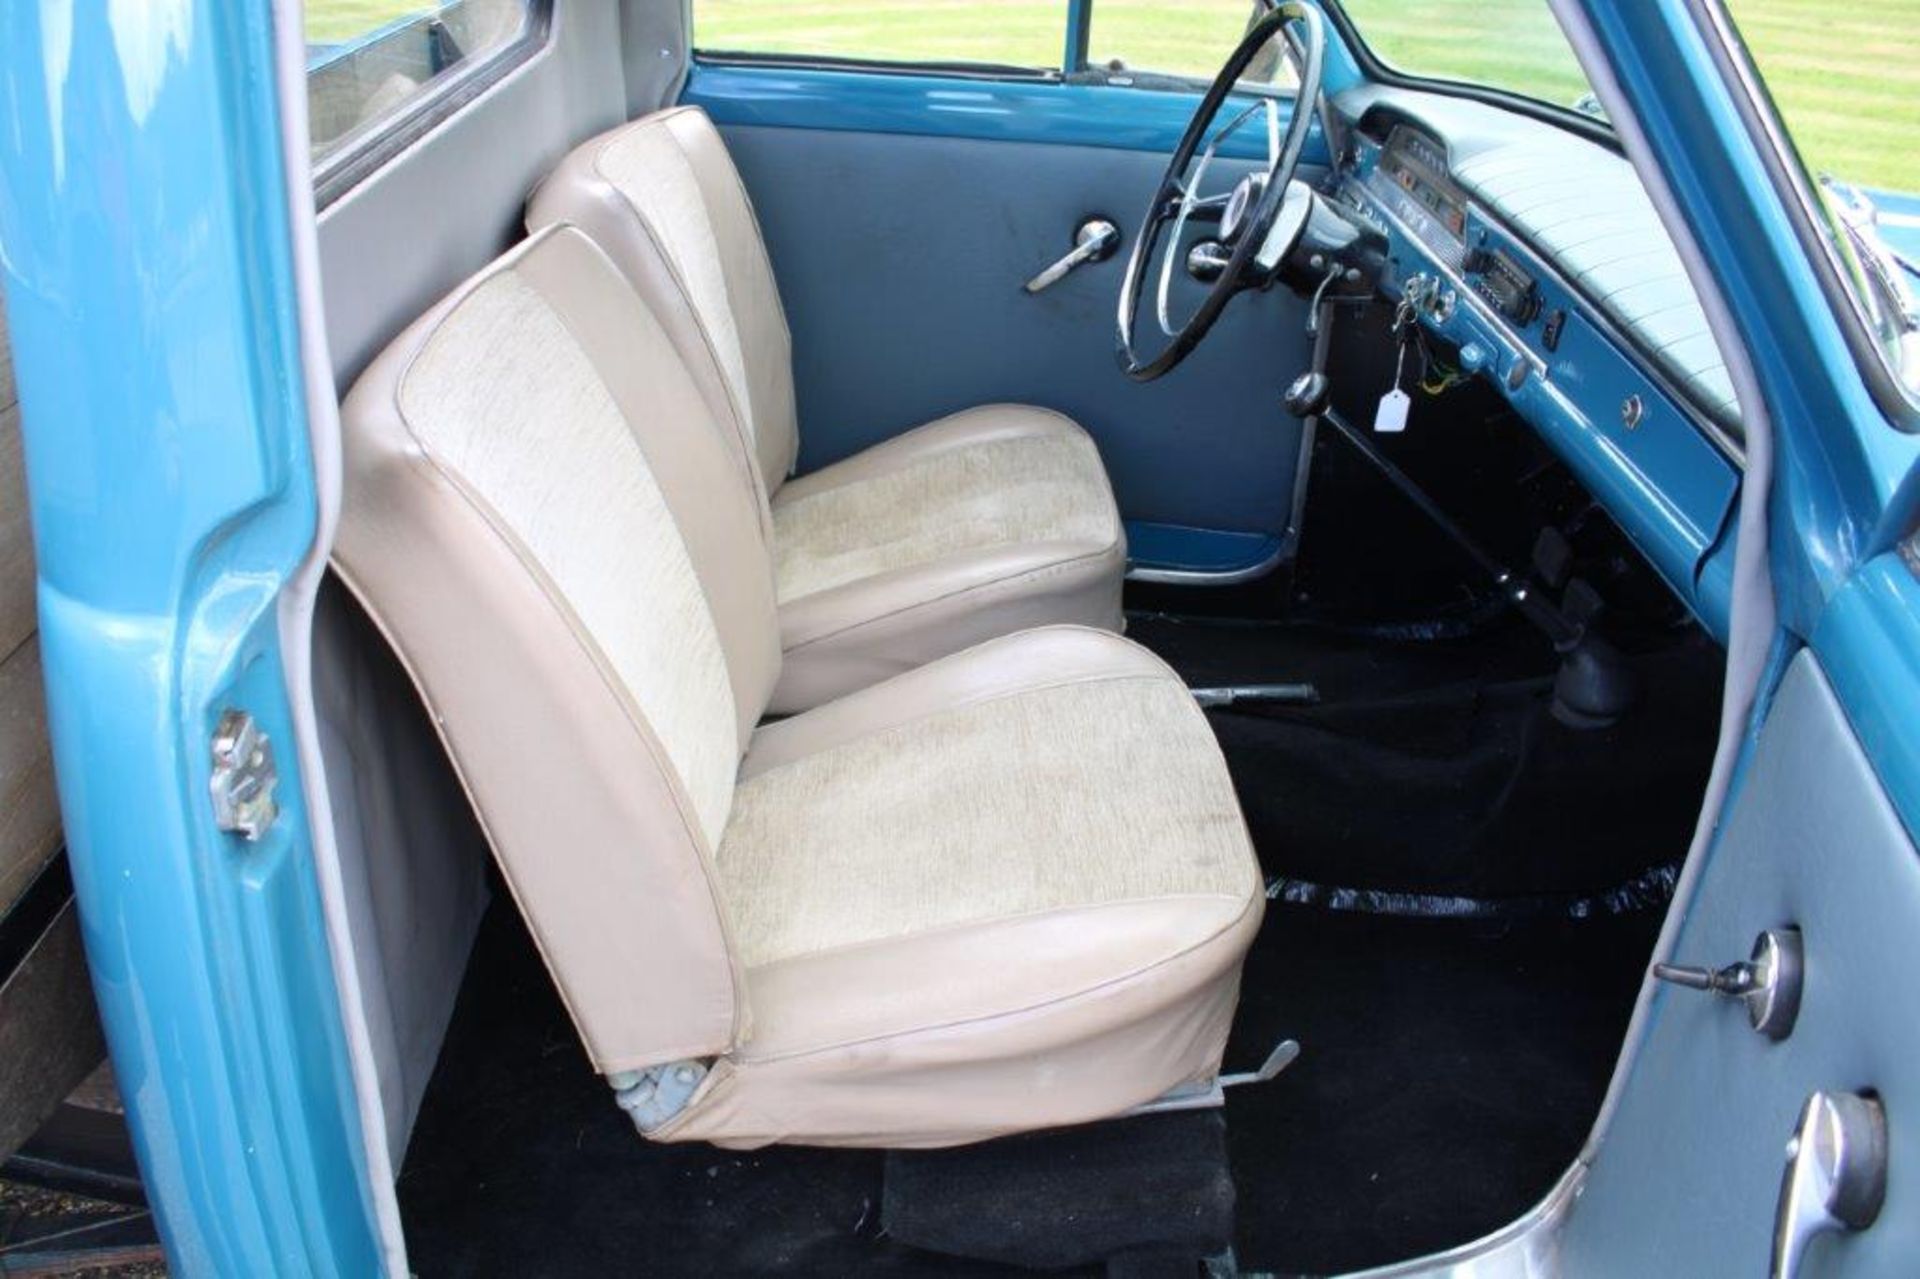 1961 Volvo P 21114 A Pick-Up LHD - Image 14 of 25